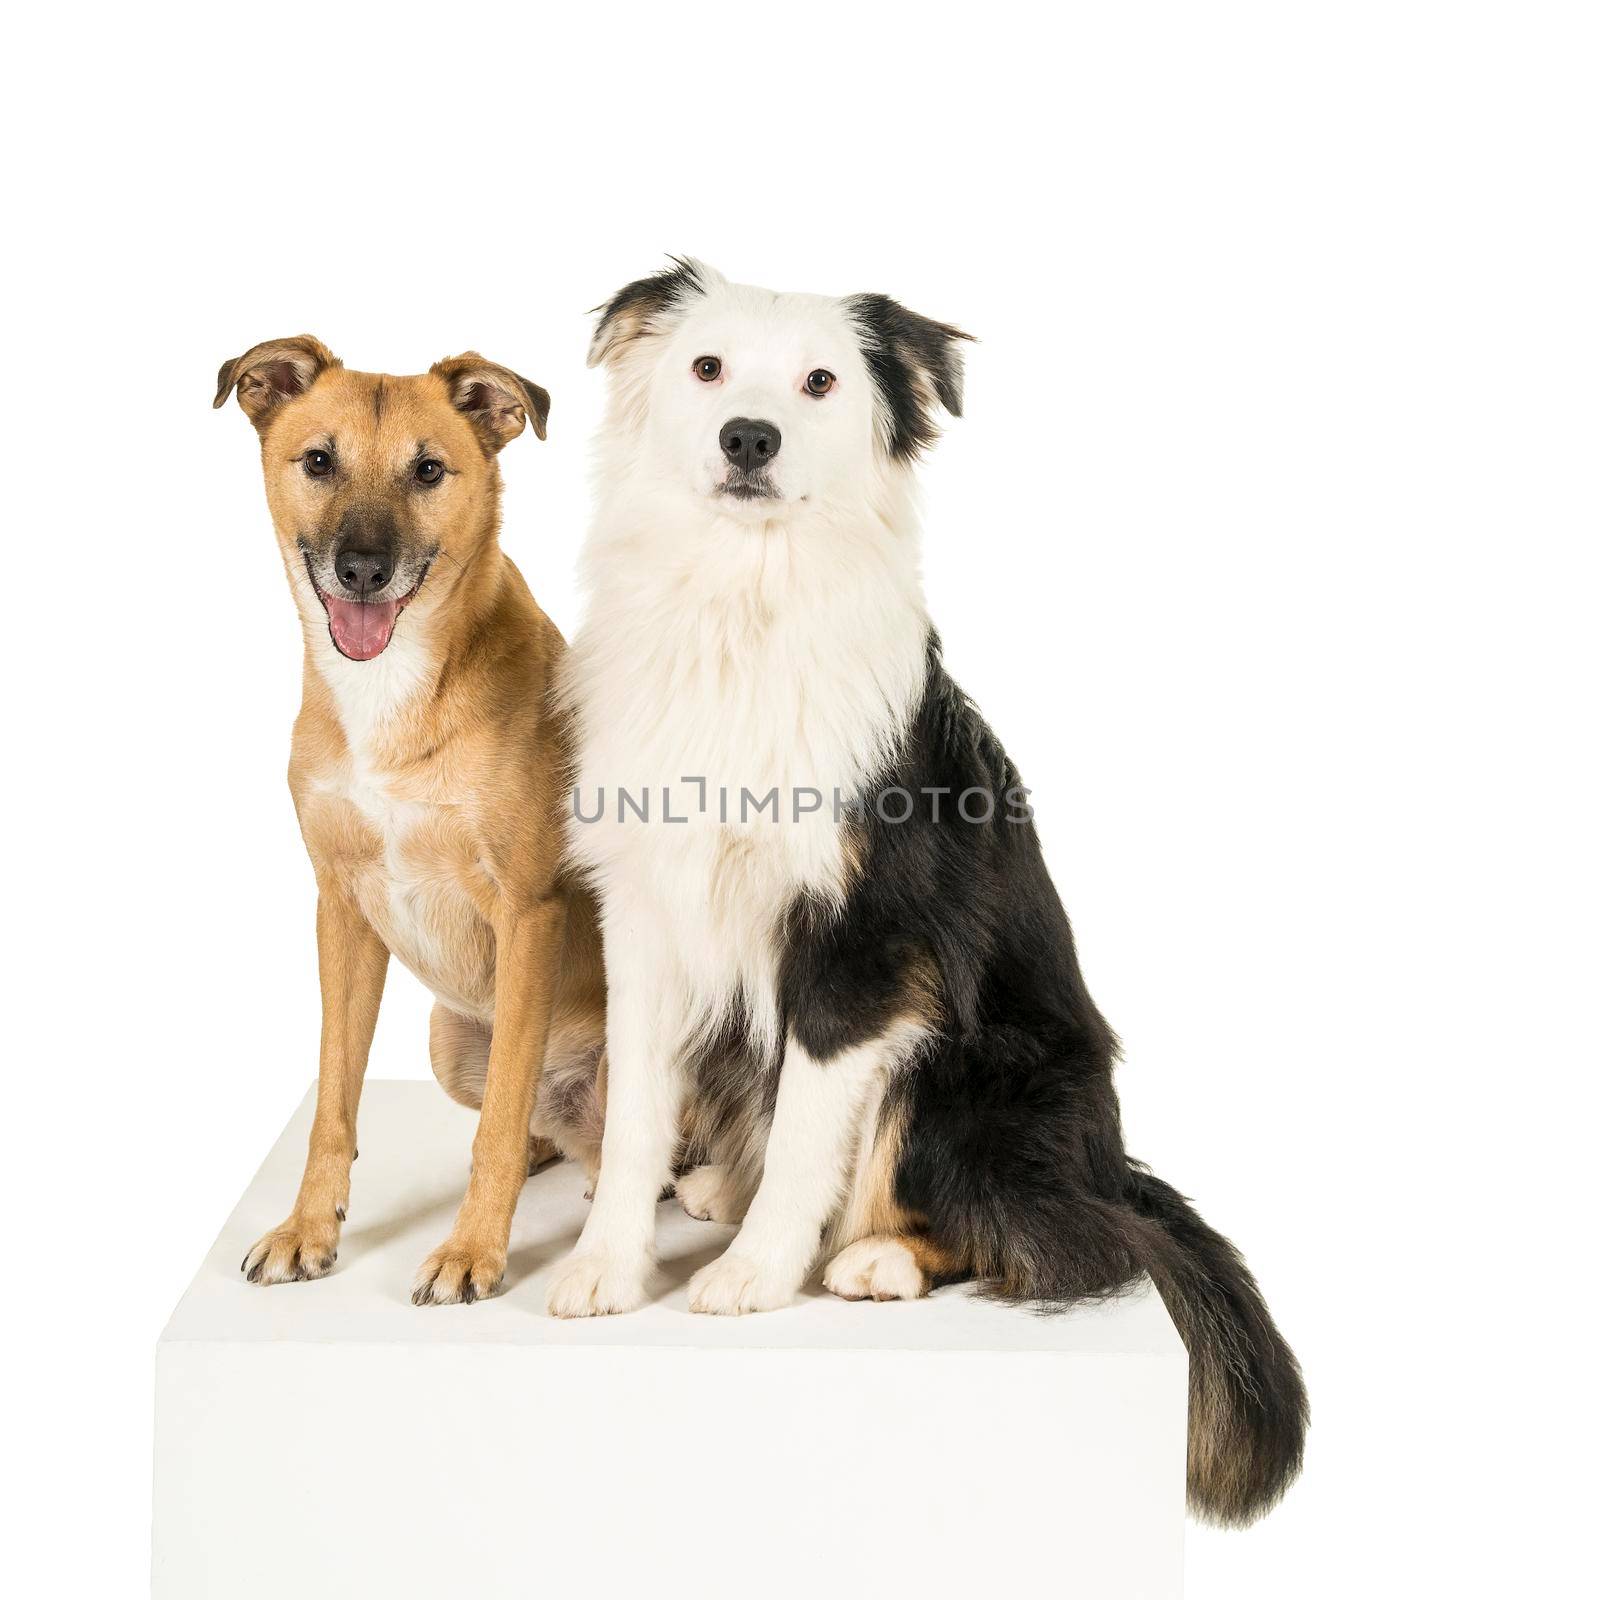 Little brown mixed breed dog and a black and white australian shepherd sitting isolated in white background looking at camera by LeoniekvanderVliet